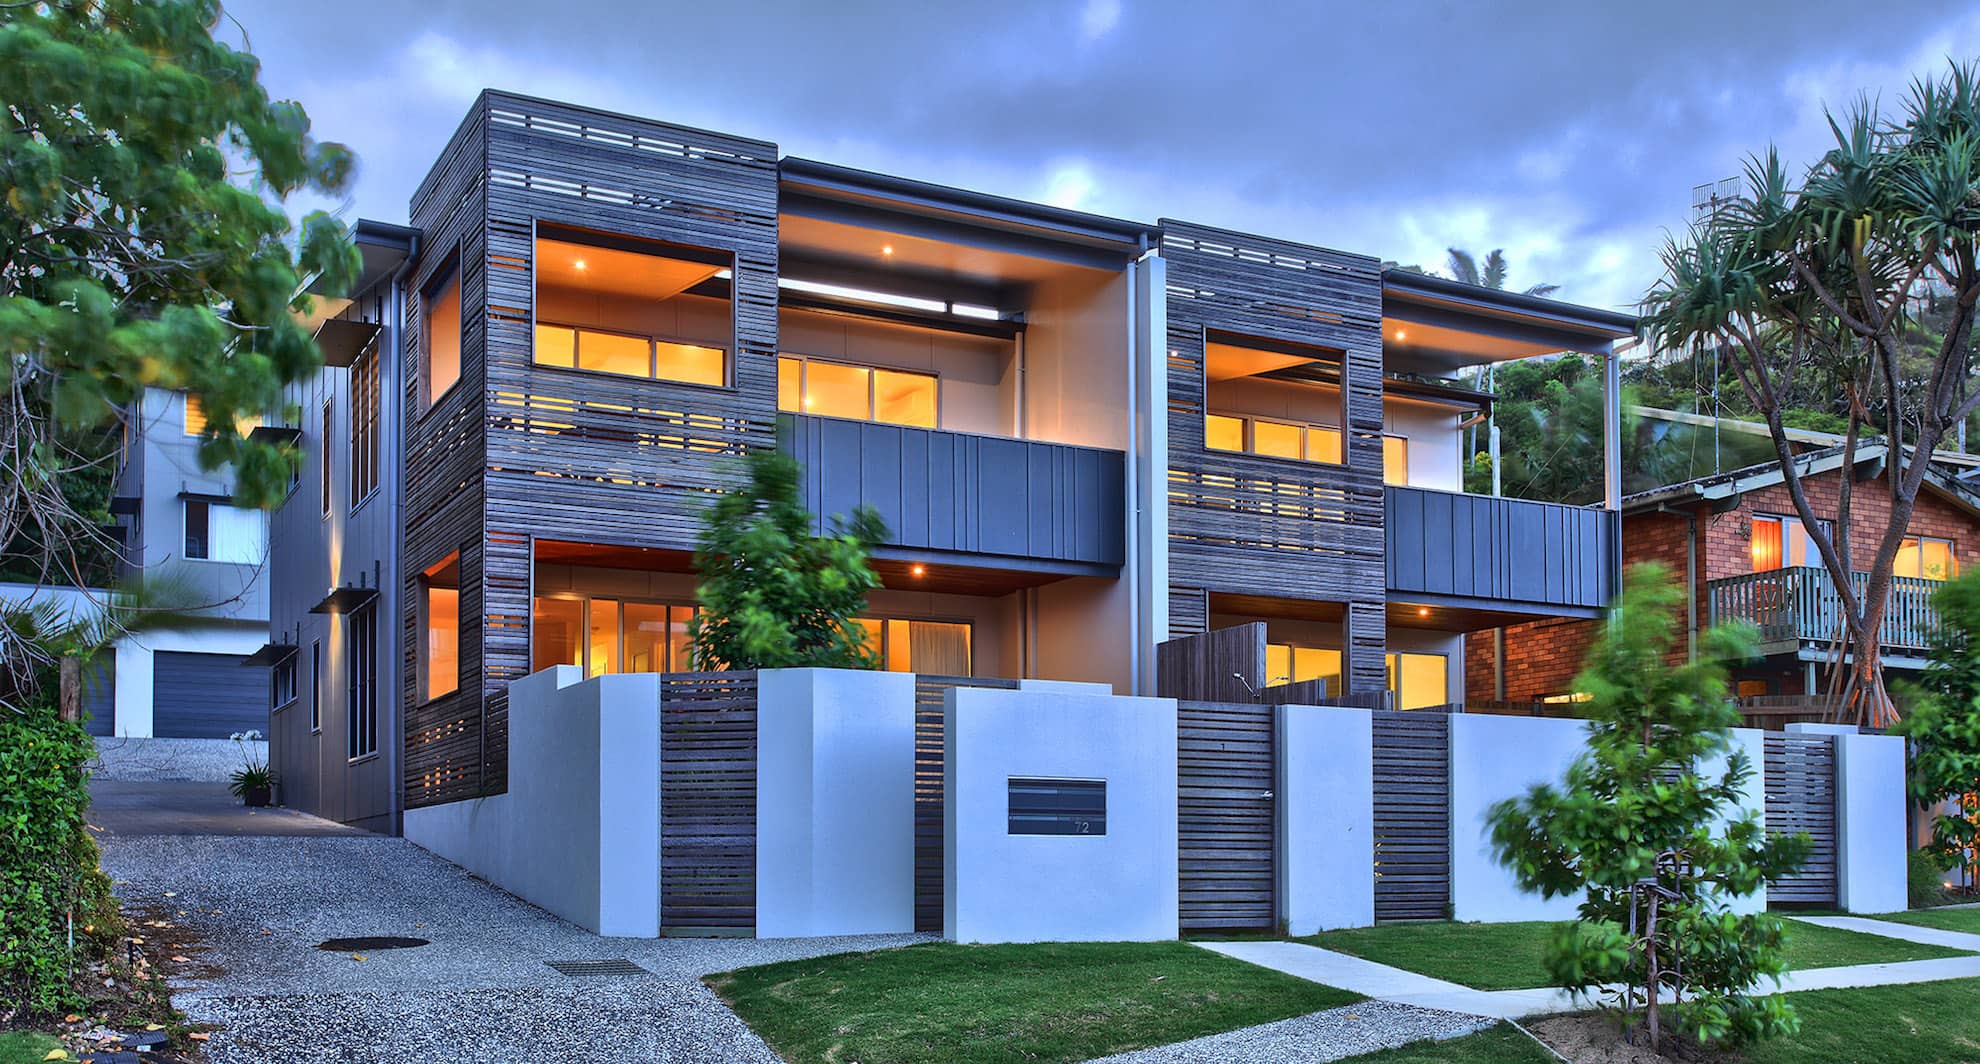 Coolum Terrace project by mdesign, a building design practice that operates on the Sunshine Coast.